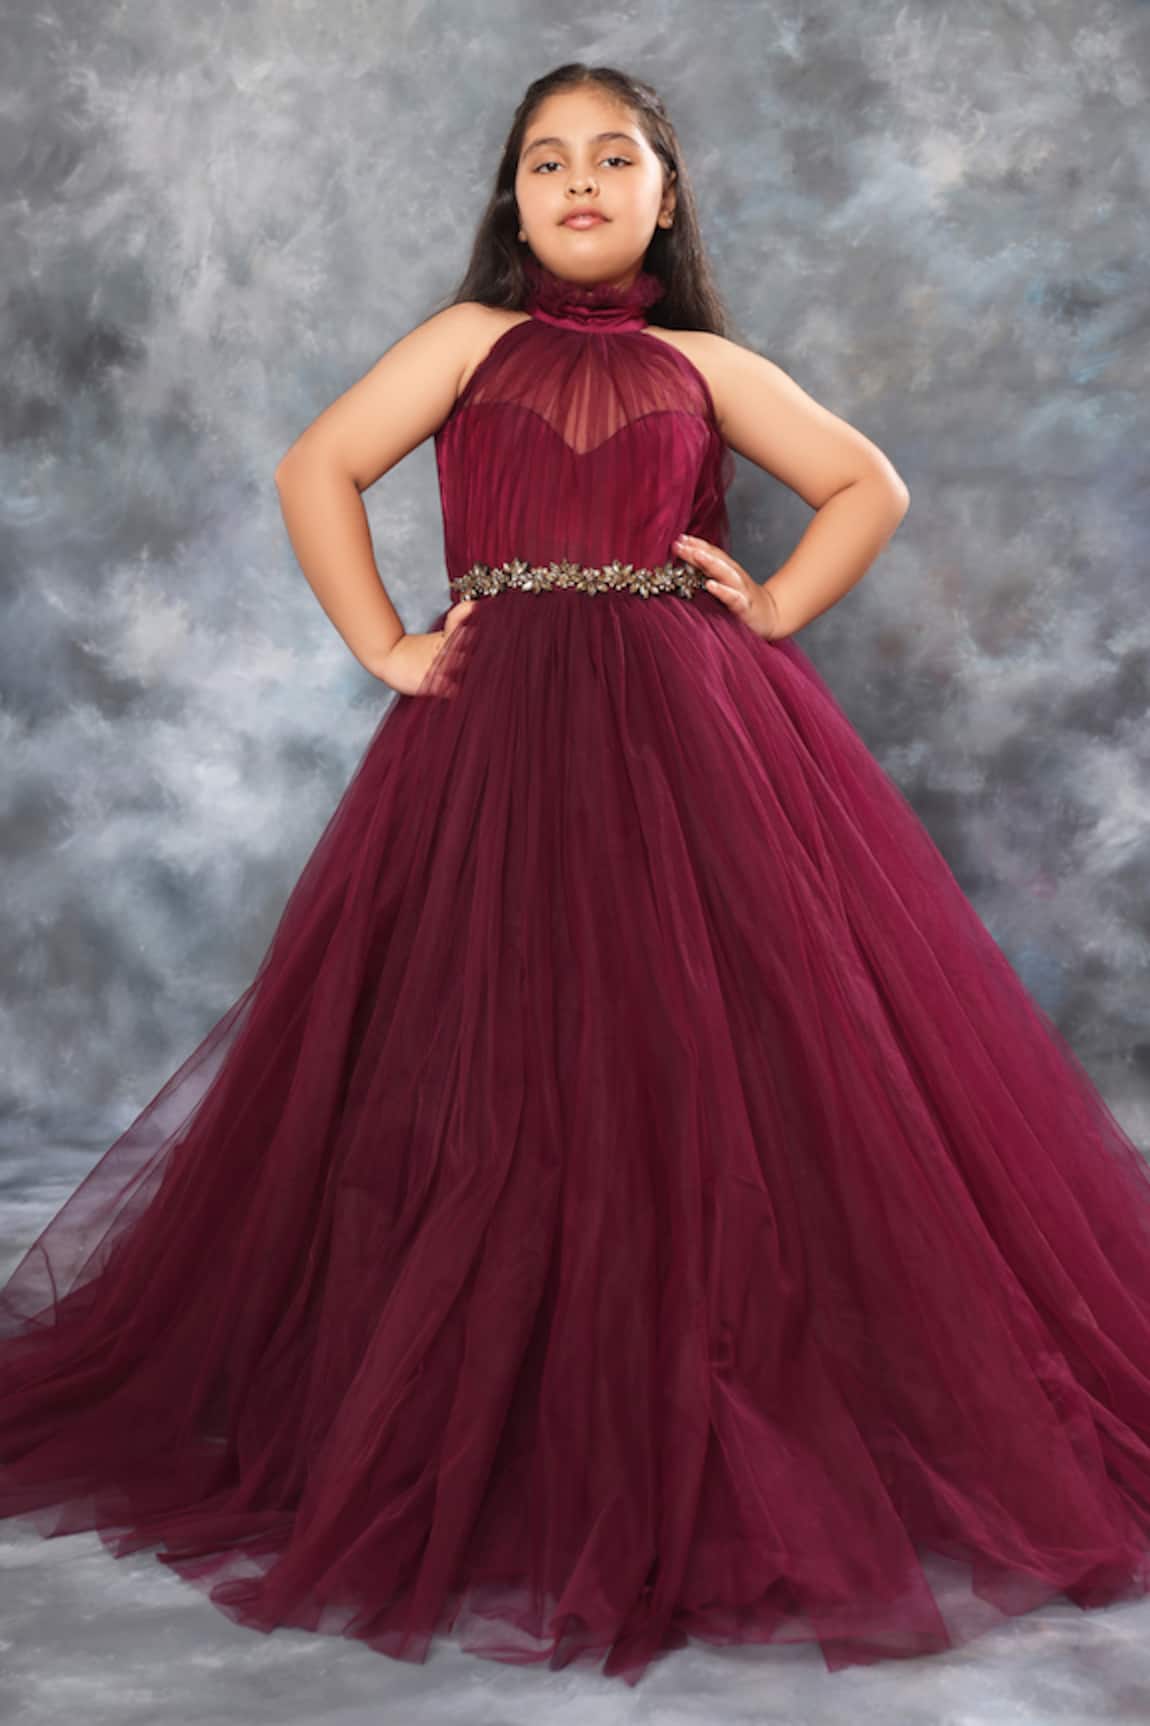 Jeweled Ruffled Mardi Gras Gowns For Princess Girls Perfect For Formal  Occasions And Pageants From Pageantshop, $54.28 | DHgate.Com